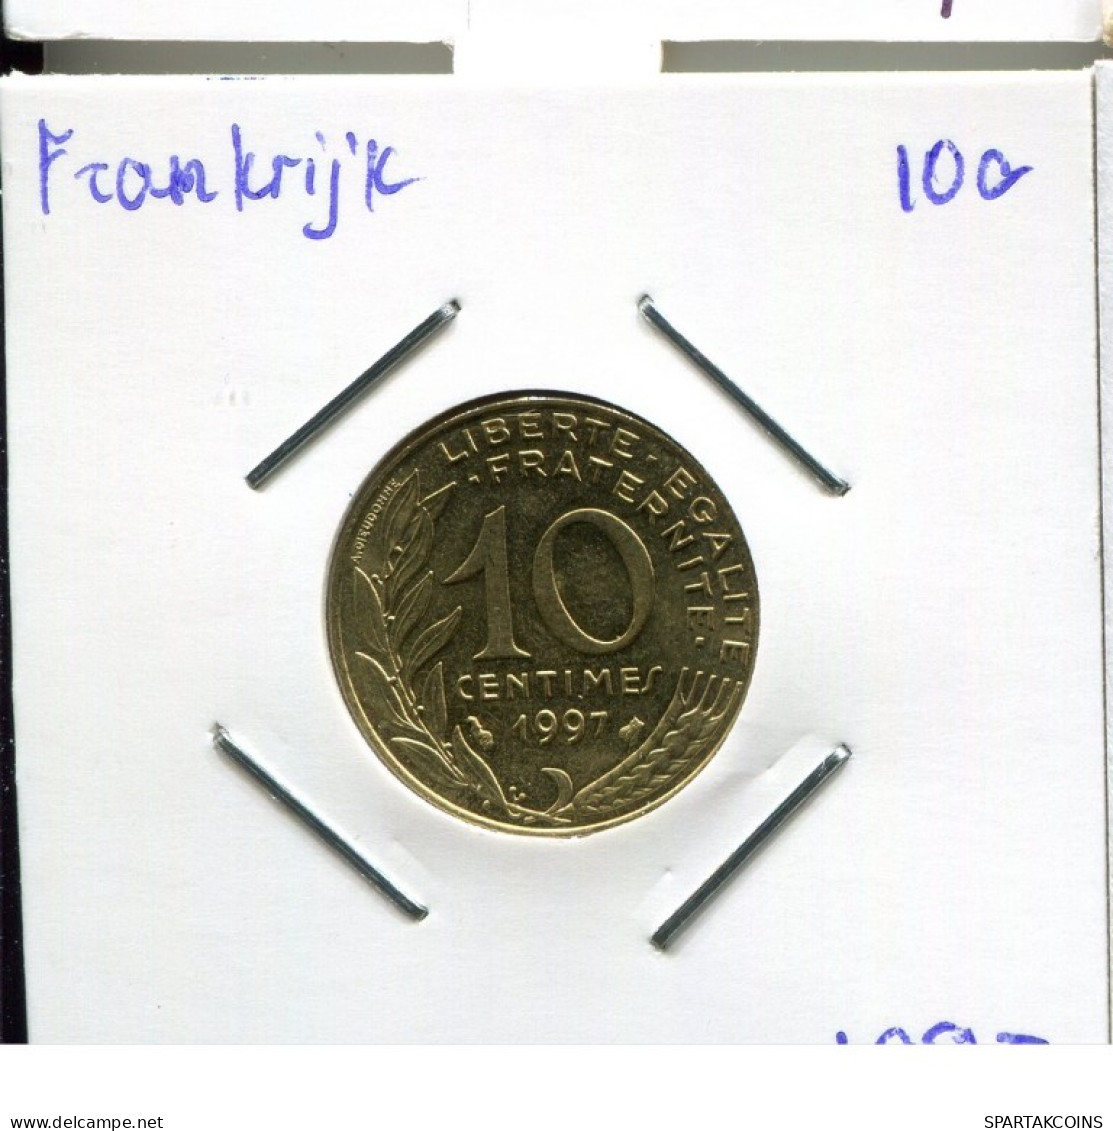 10 CENTIMES 1997 FRANCE Coin French Coin #AM838.U.A - 10 Centimes